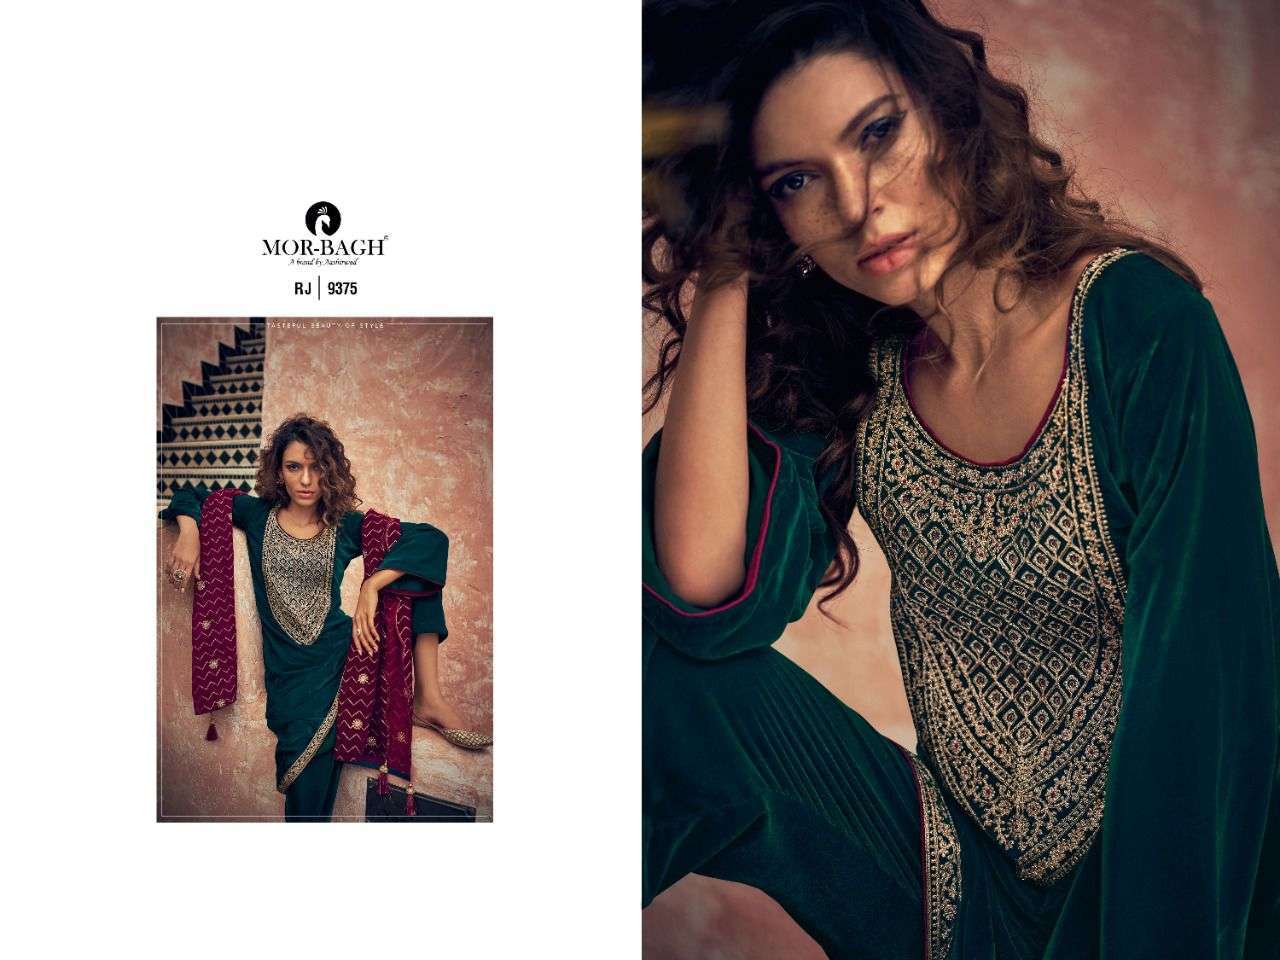 MOR BAGH PRESENT RANJHA VELVET WINTER COLLECTION IN WHOLESALE RATE IN SURAT - SAIDHARANX 